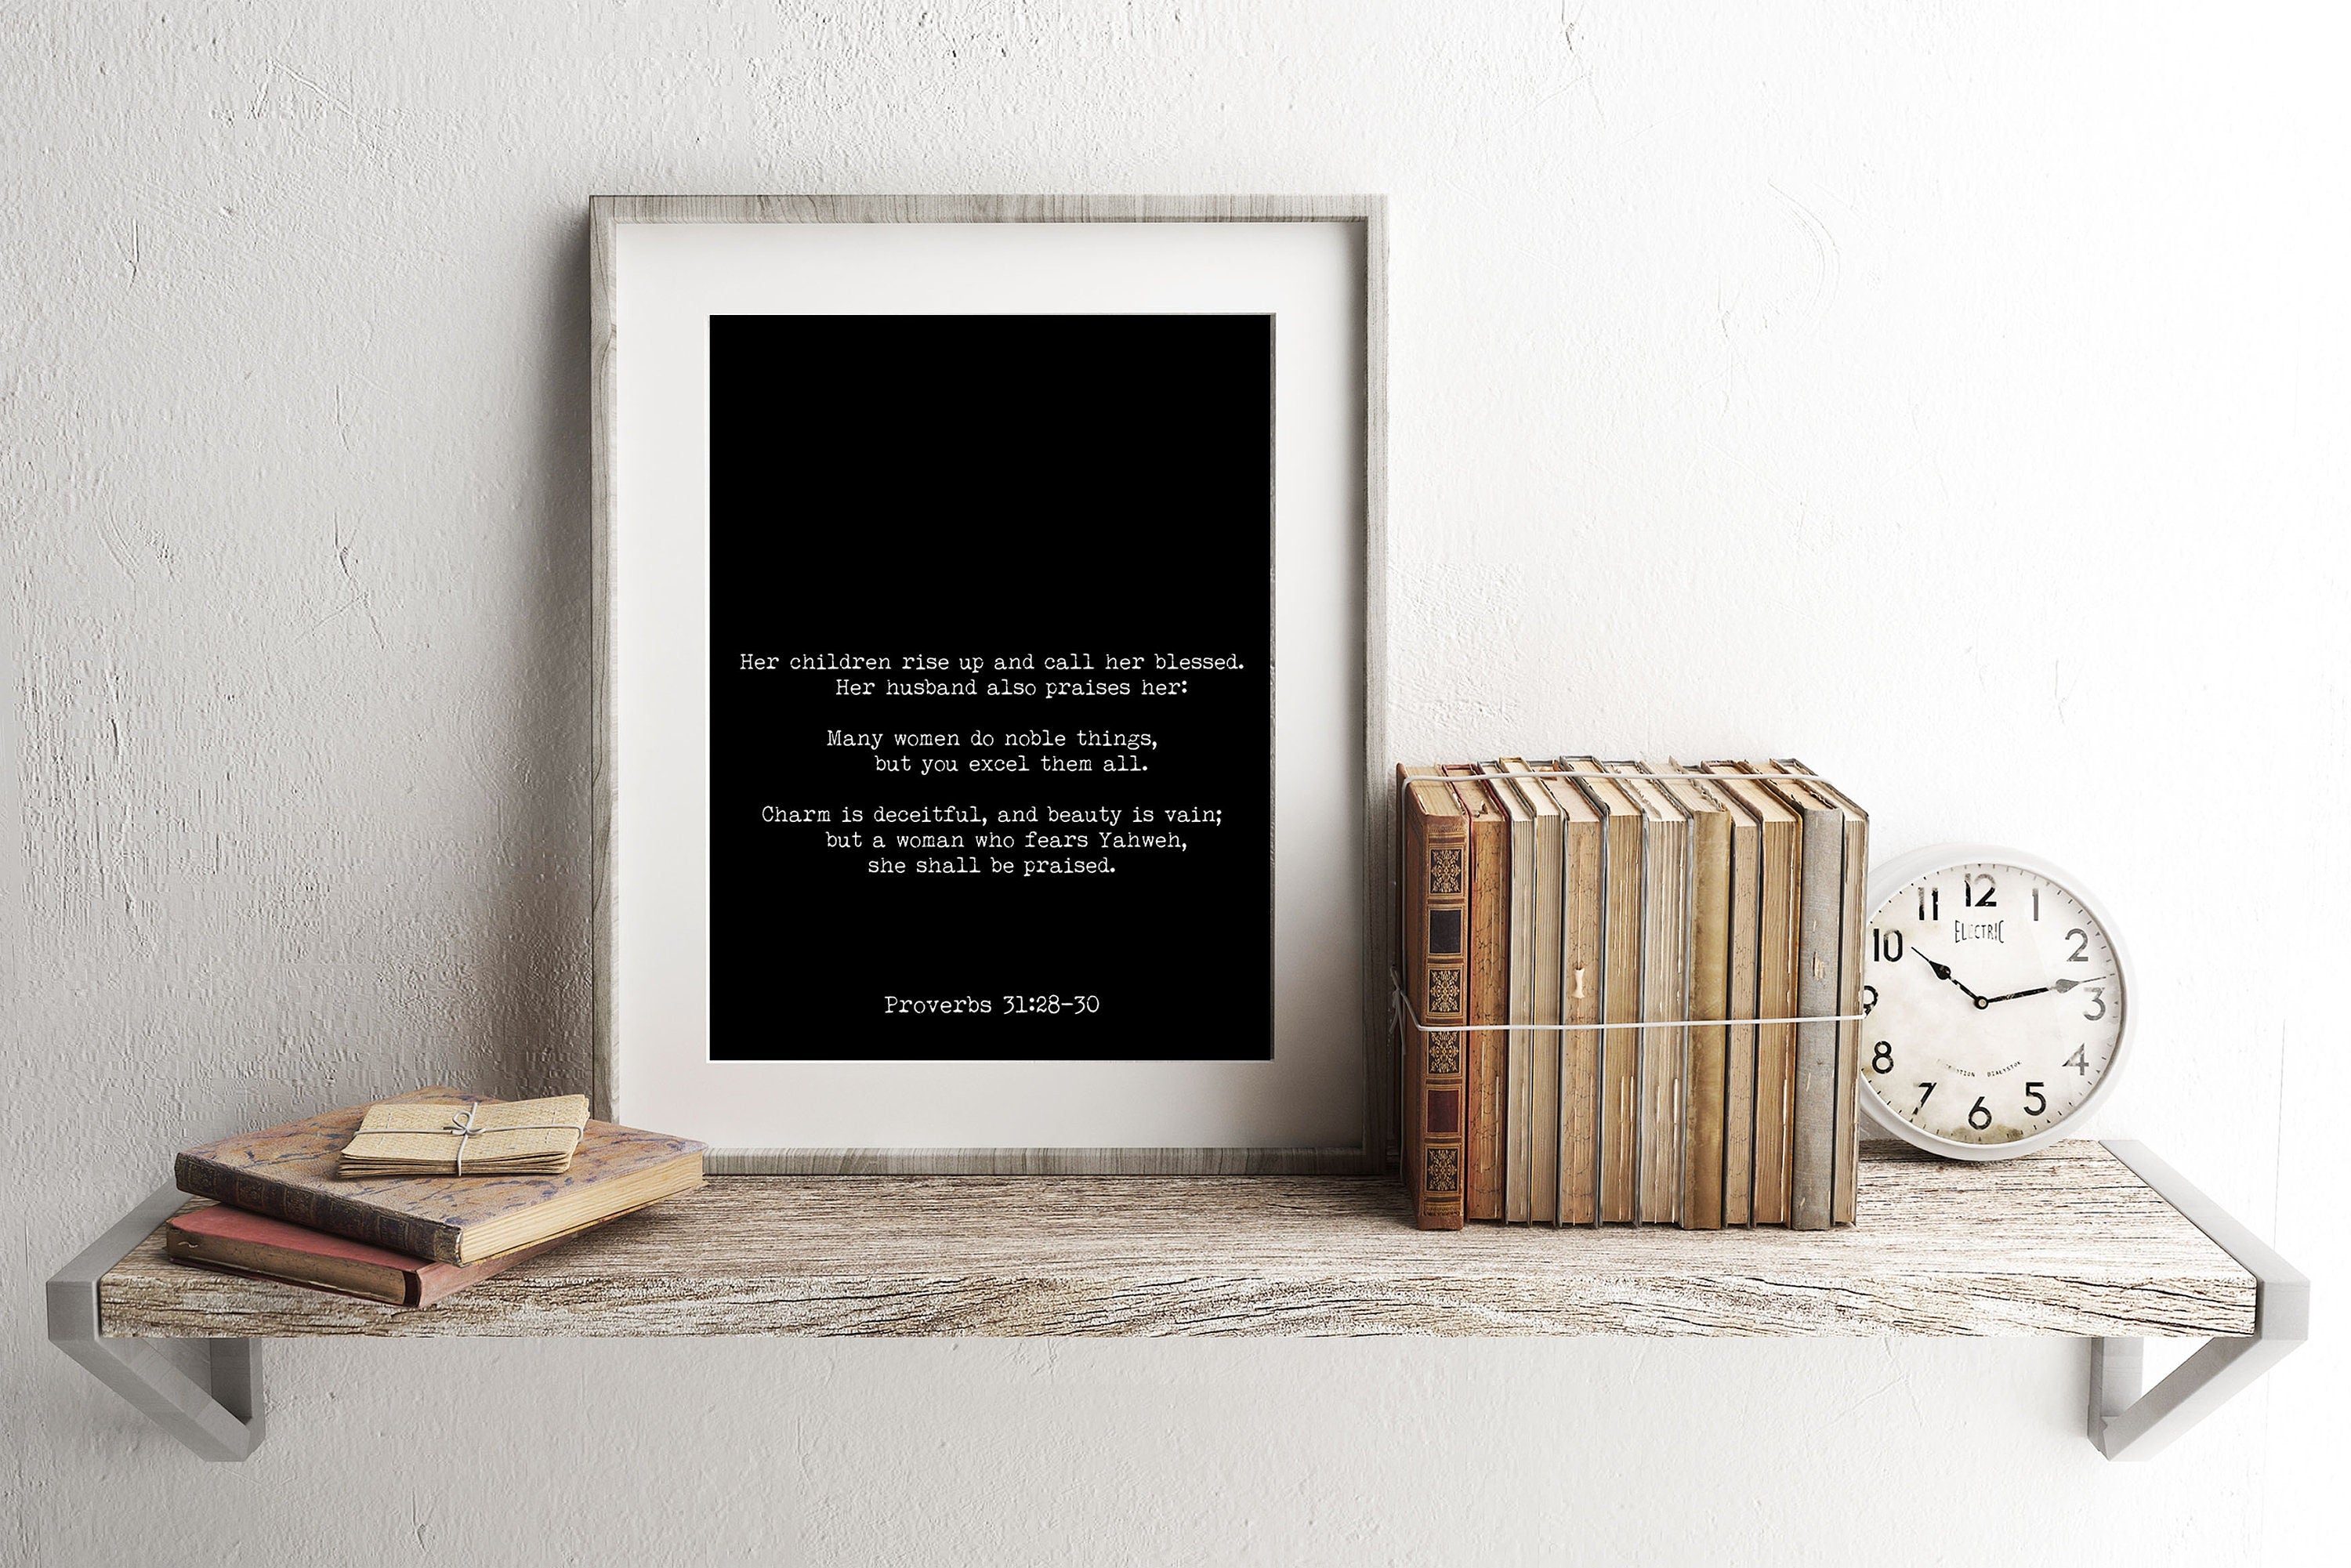 Proverbs 31:28-30 Bible Verse Print, Inspirational Gift Wall Art in Black & White